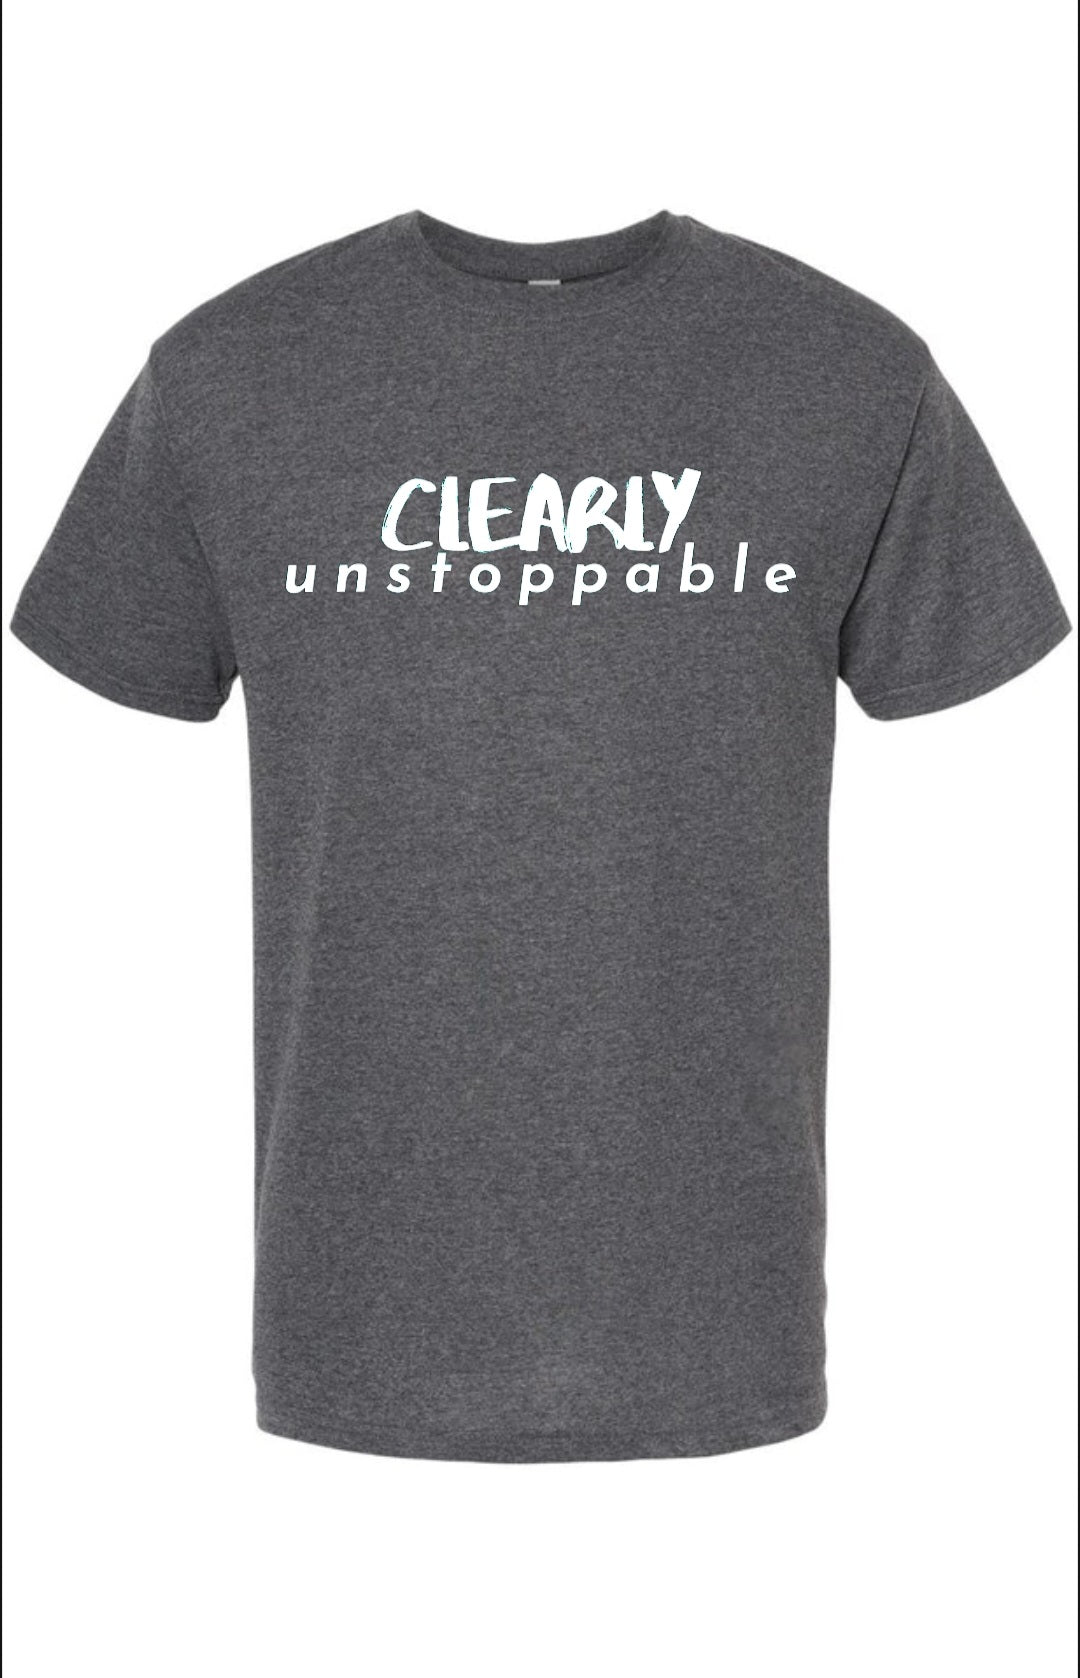 CLEARLY unstoppable Tee